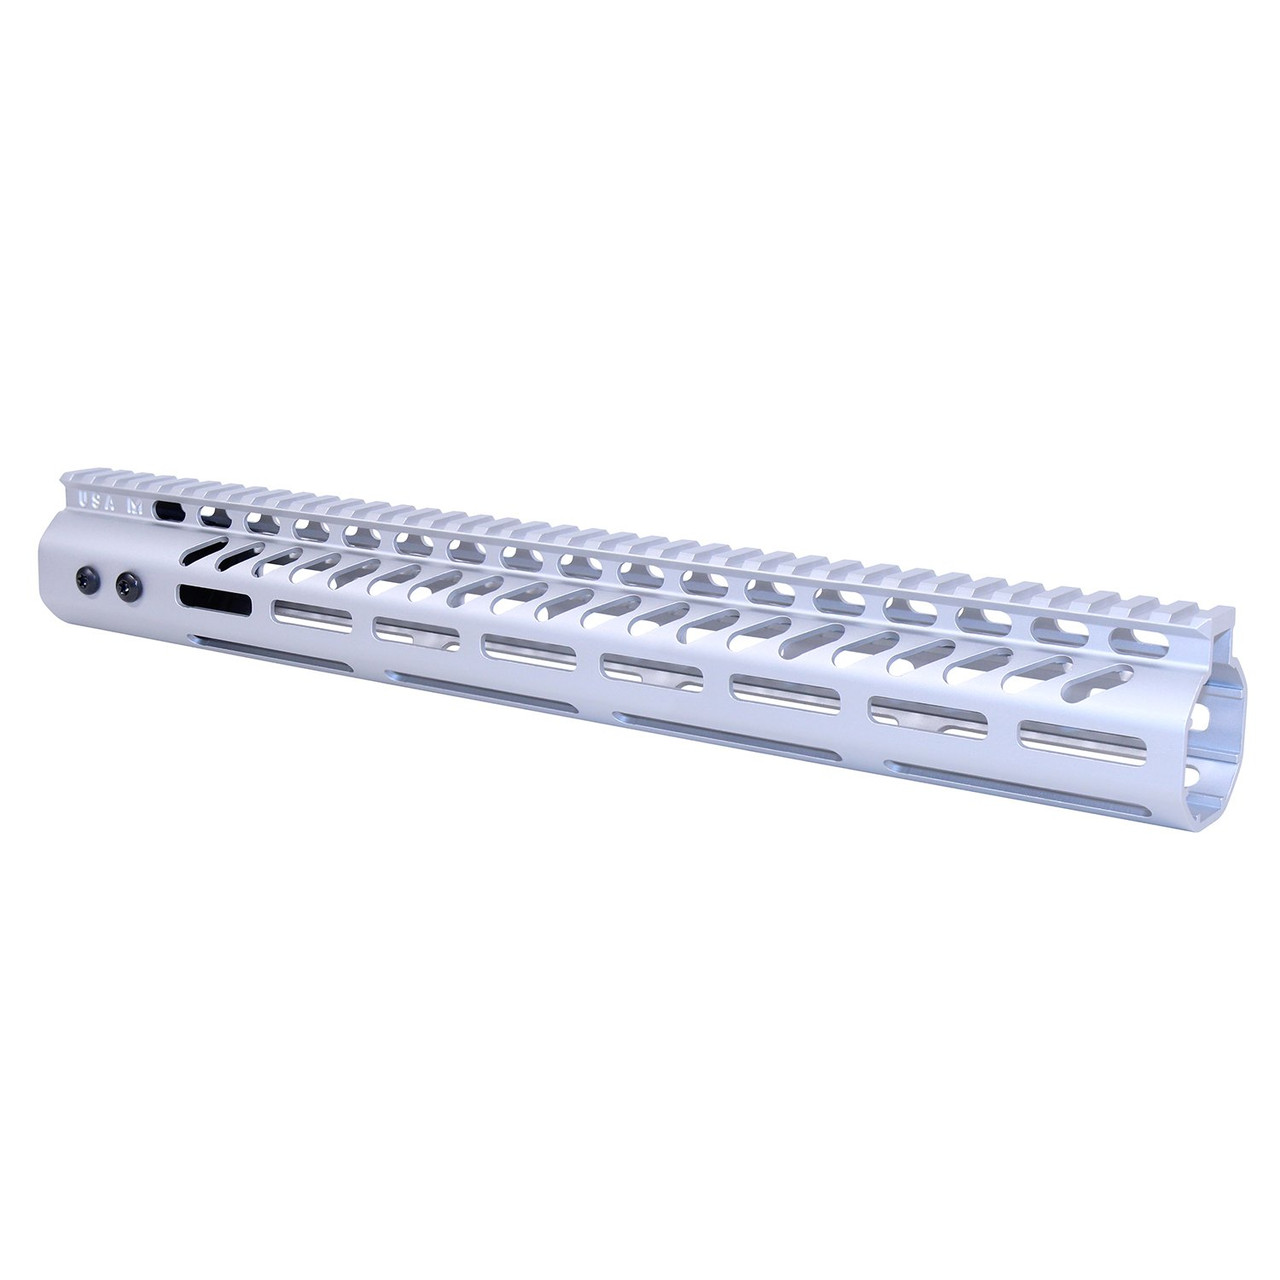 Guntec USA GT-15MLK-308-CLEAR 15" Ultra Lightweight Thin M-LOK System Free Floating Handguard With Monolithic Top Rail (.308 Cal) (Anodized Clear)